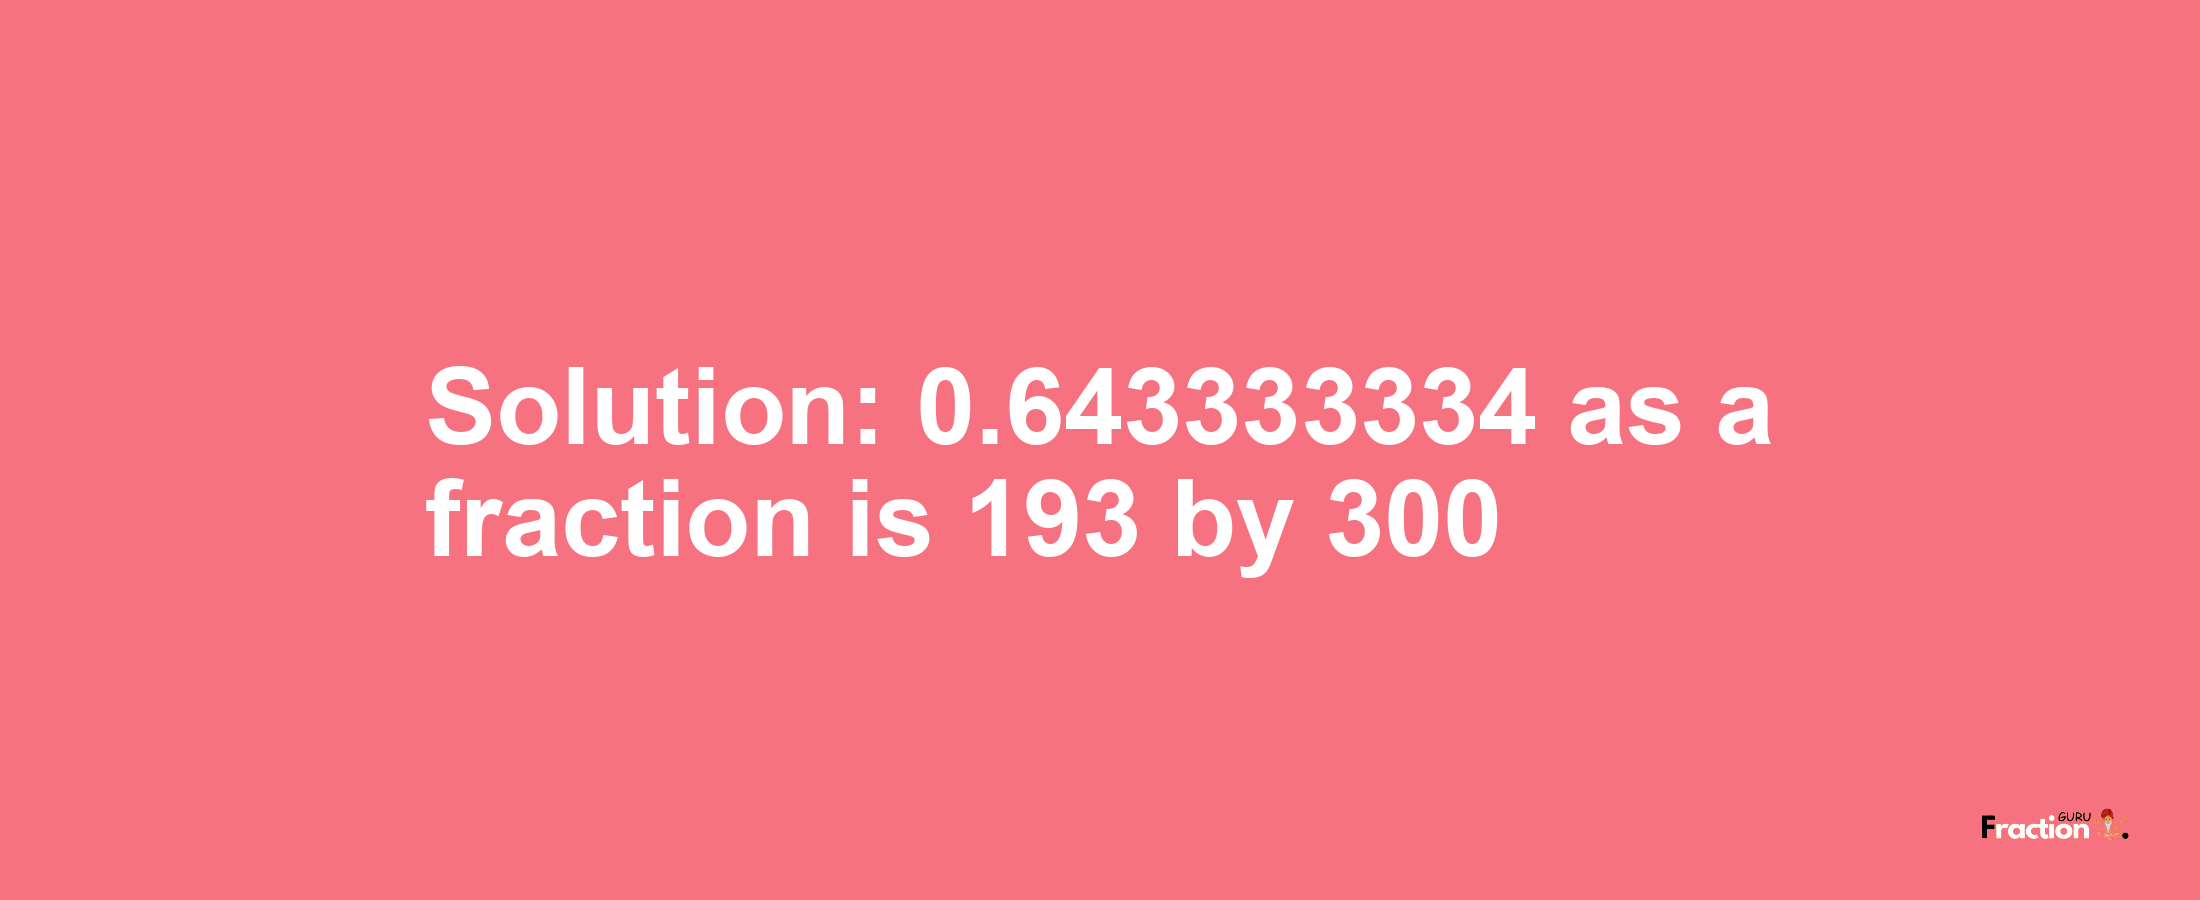 Solution:0.643333334 as a fraction is 193/300